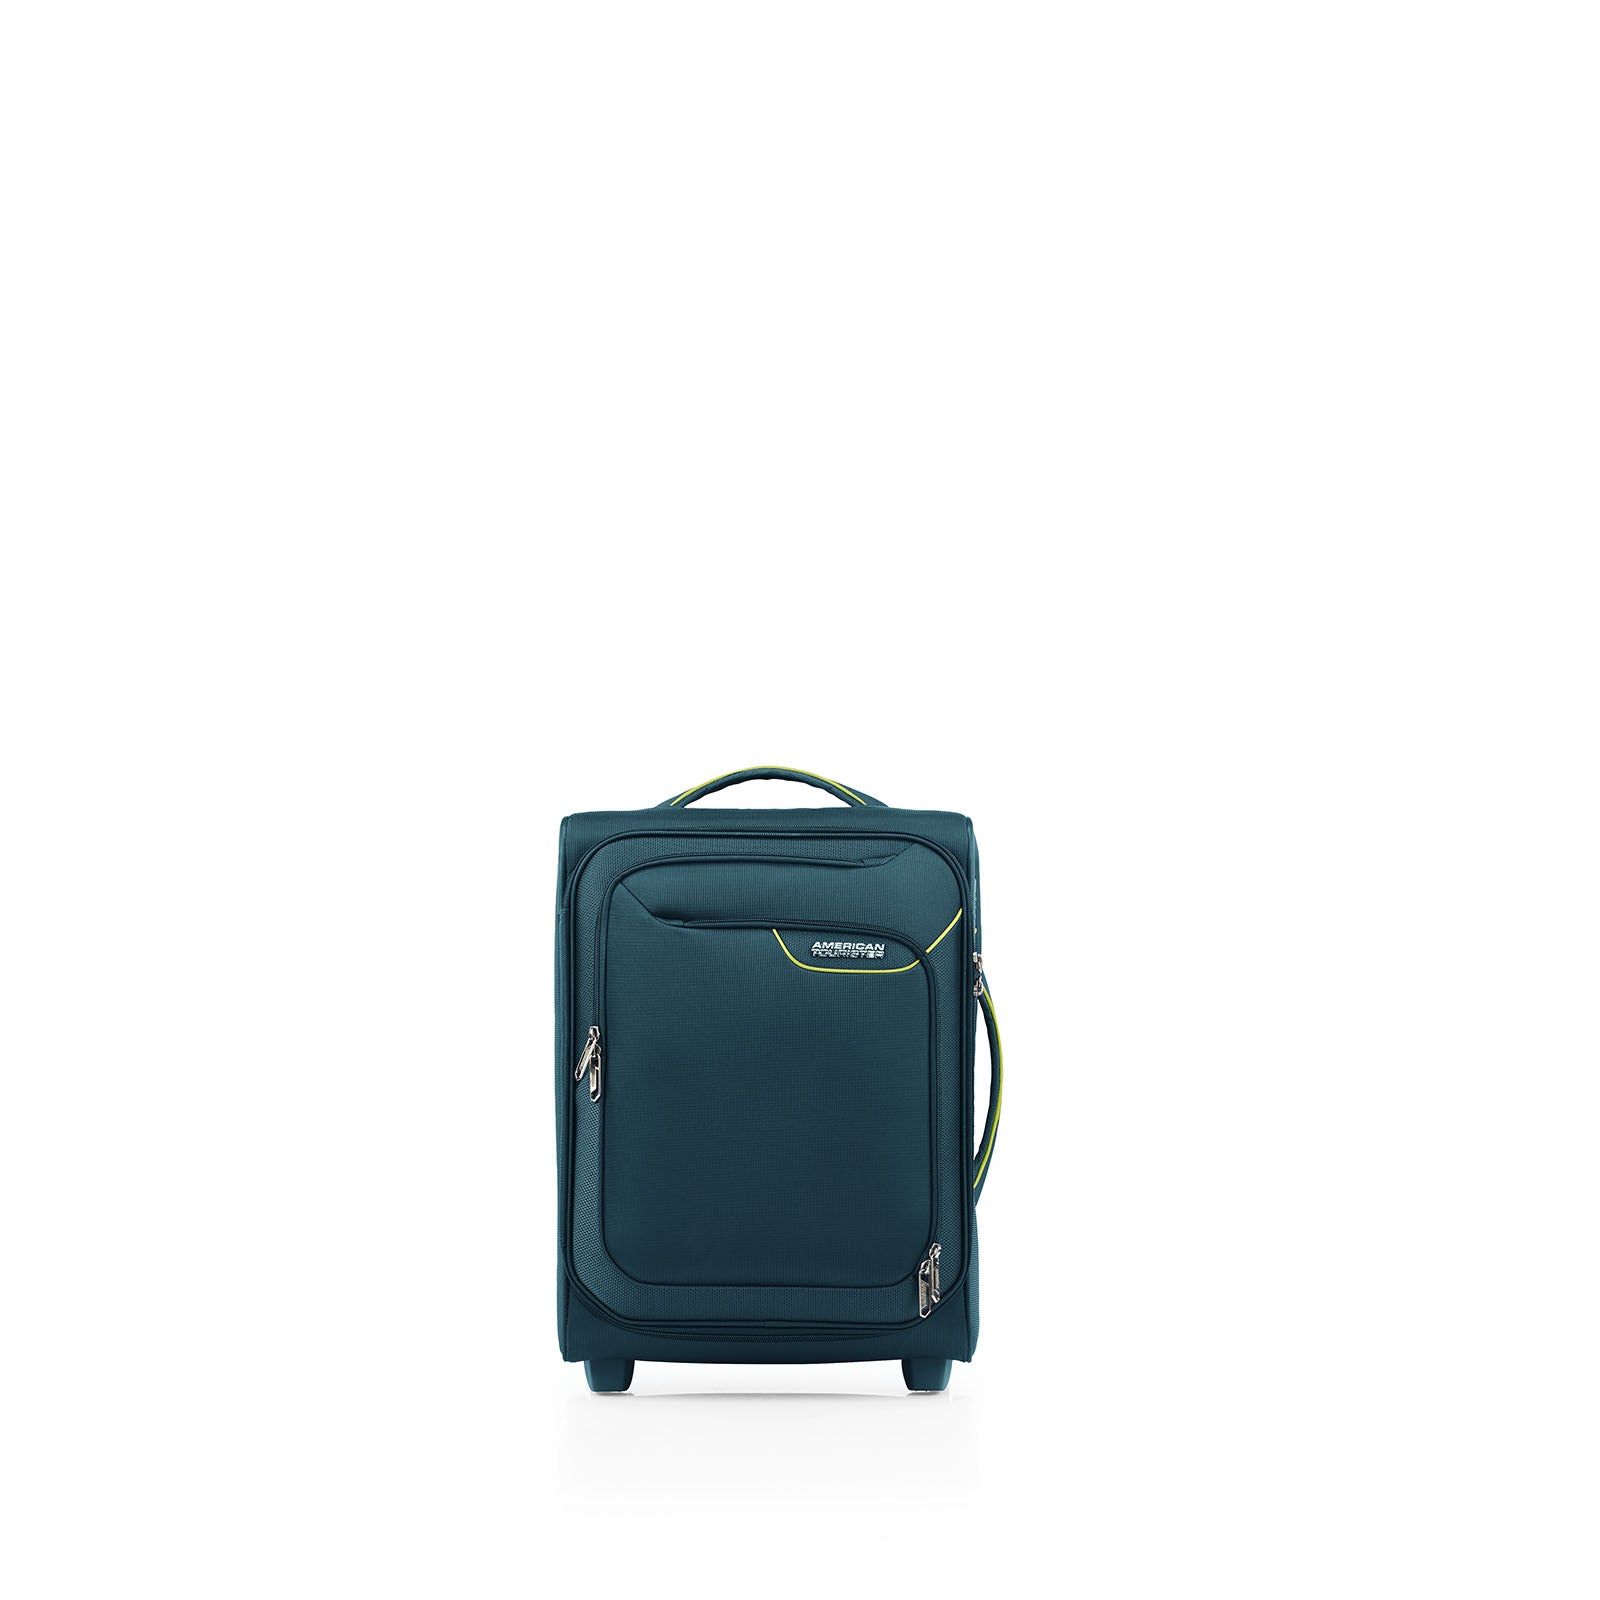 American-Tourister-Applite-4-Eco-50cm-Carry-On-Suitcase-Varsity-Green-Front